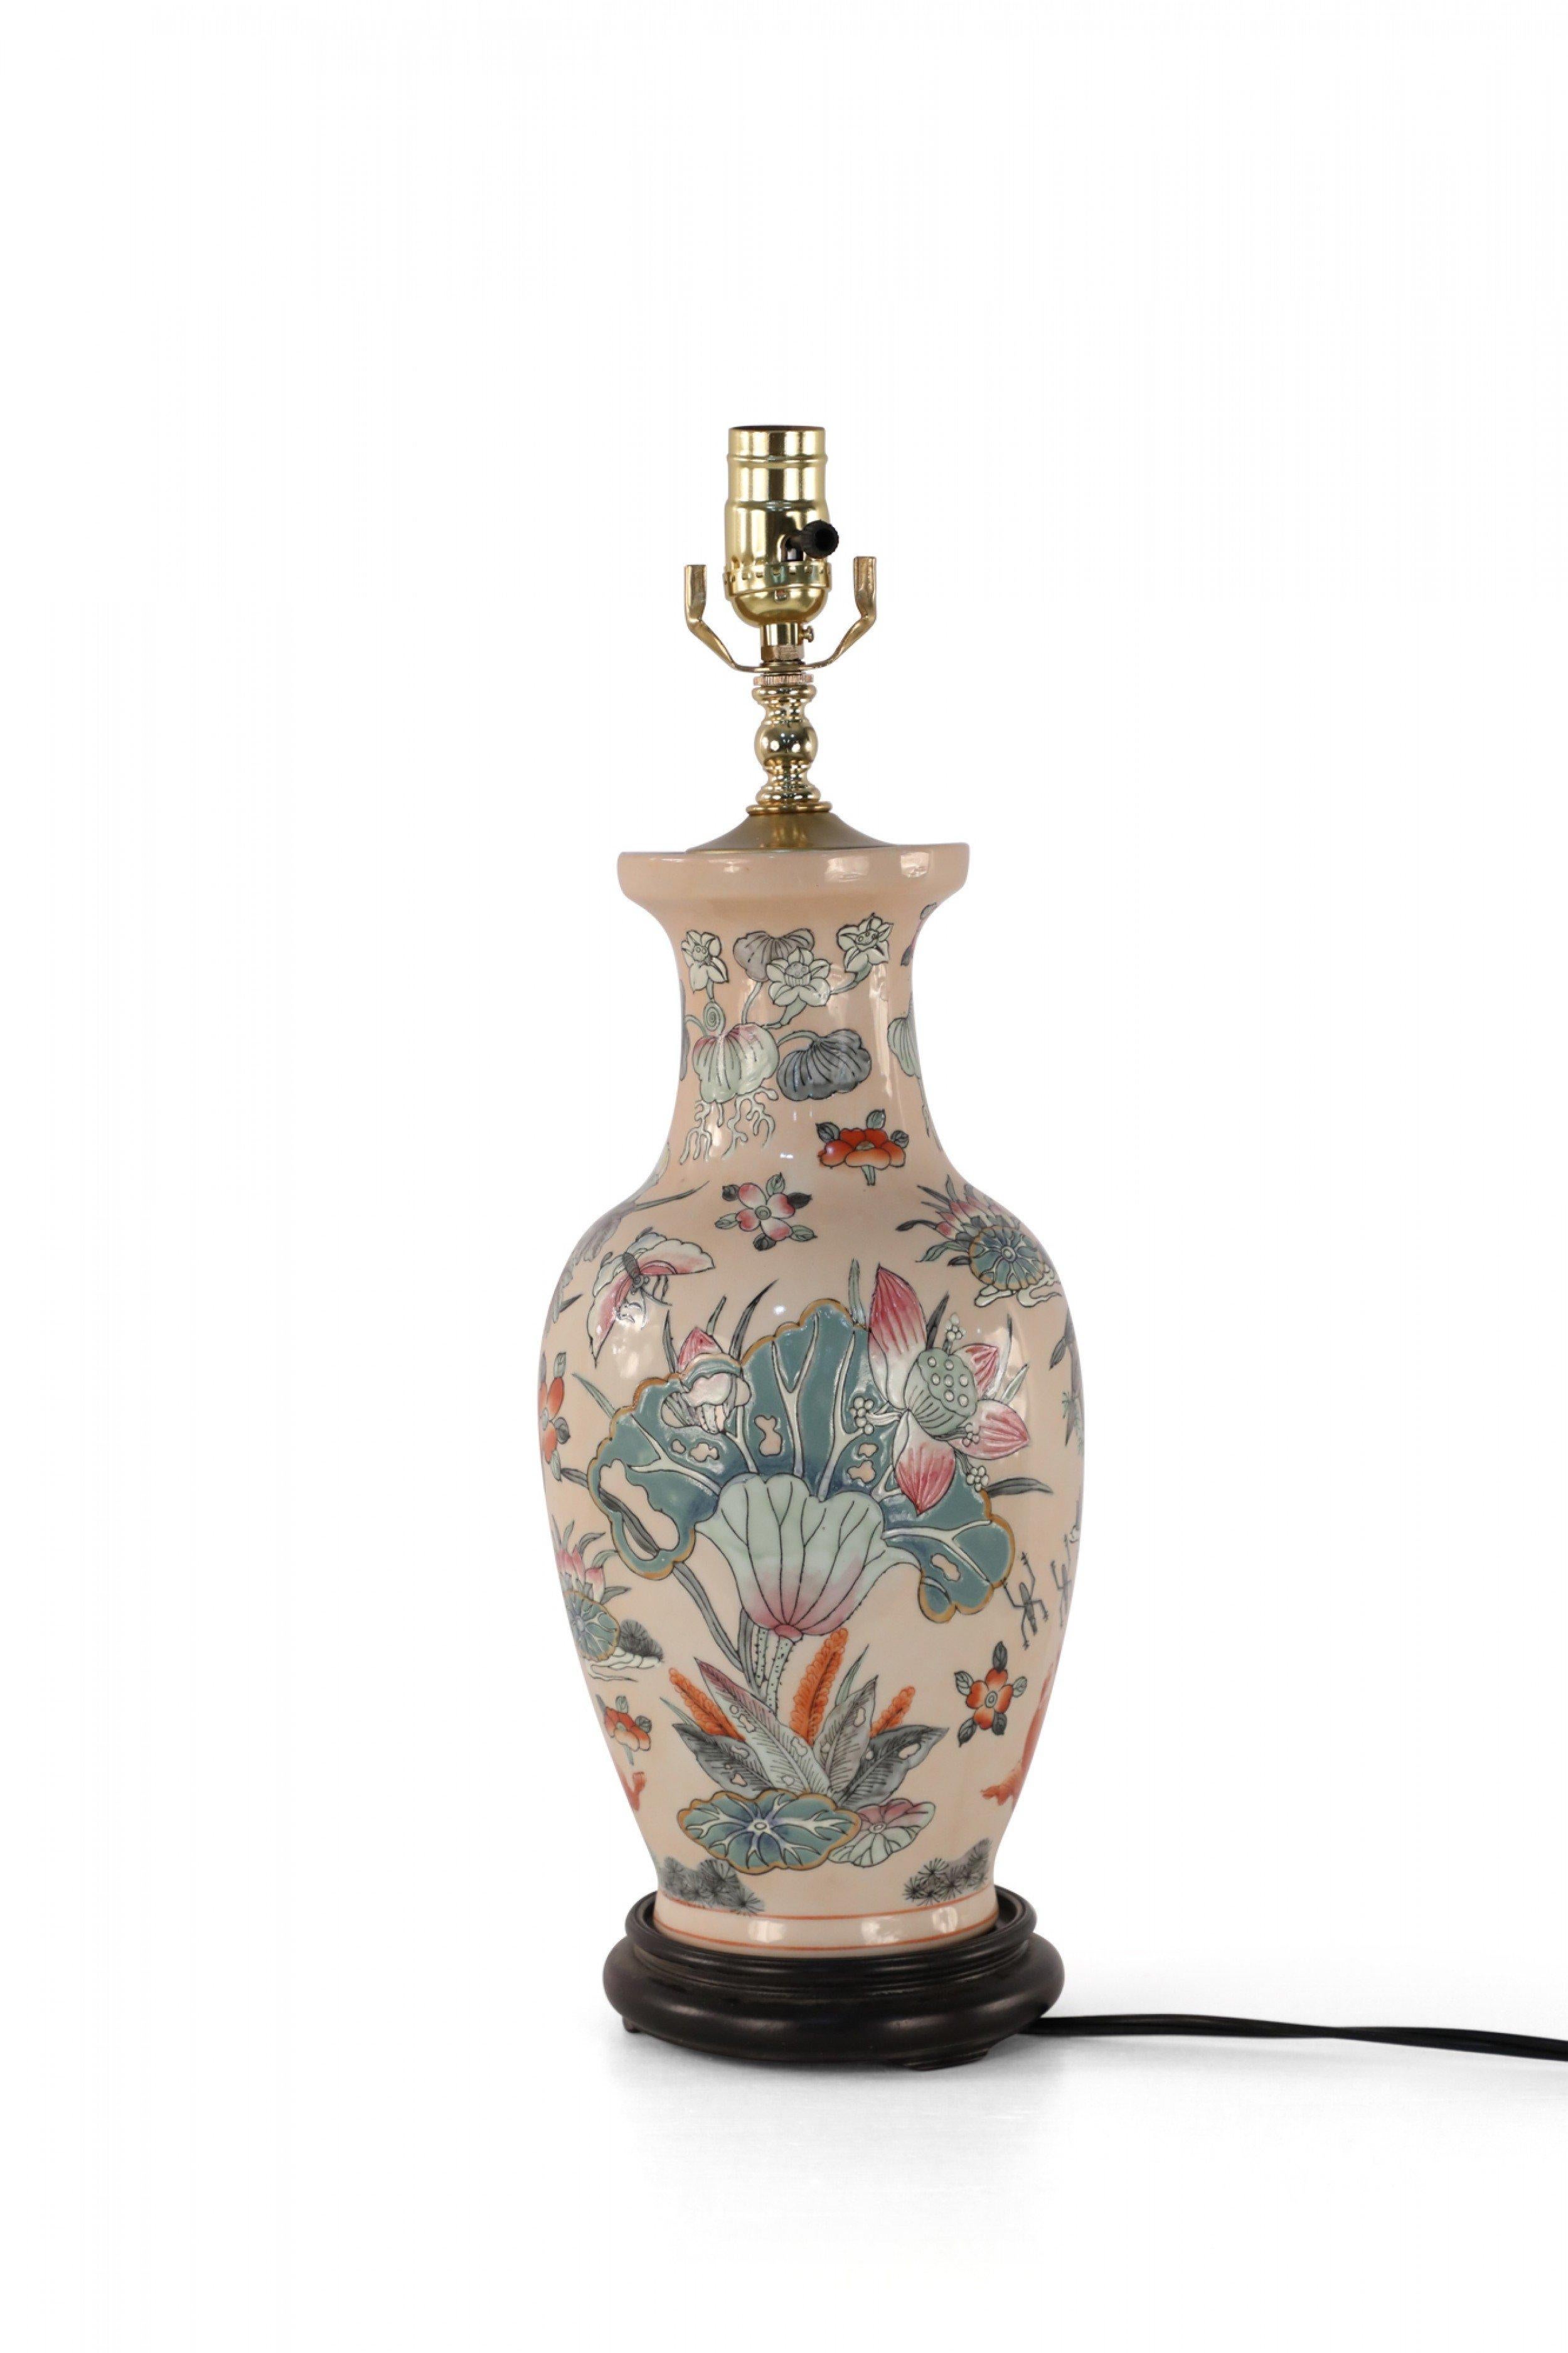 Chinese pink ceramic table lamp made from a baluster-shaped vase decorated with colorful birds, florals and koi on a wooden base with brass hardware.
     